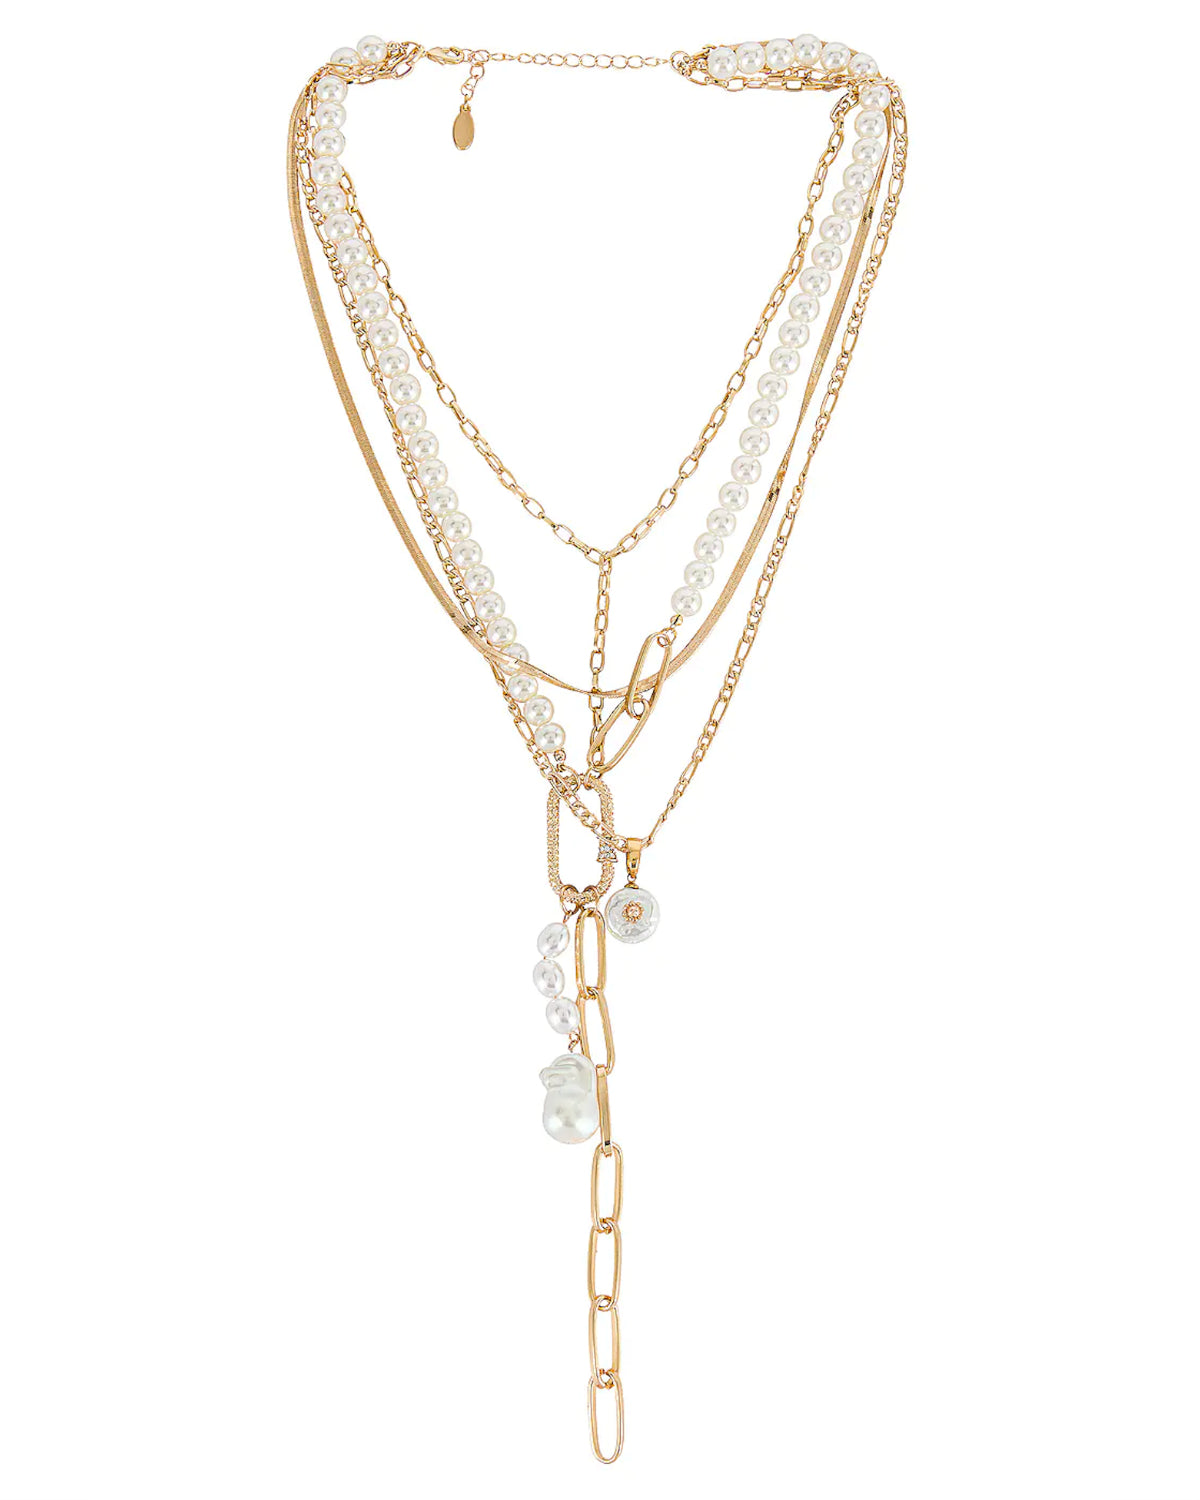 PEARL LARIAT NECKLACE